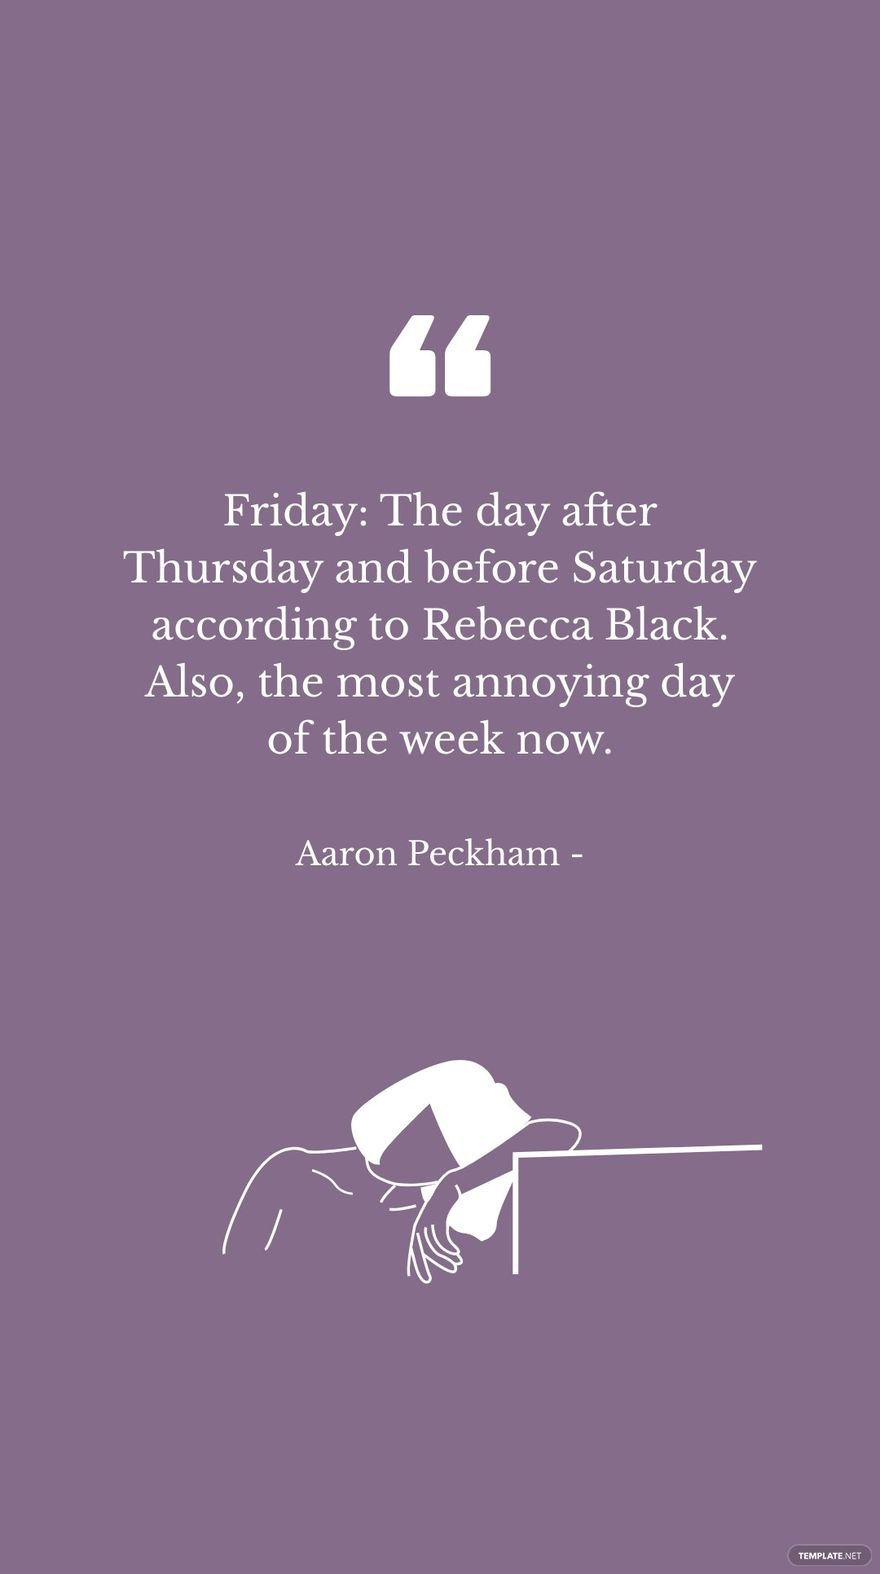 Free Aaron Peckham - Friday: The day after Thursday and before Saturday according to Rebecca Black. Also, the most annoying day of the week now. in JPG